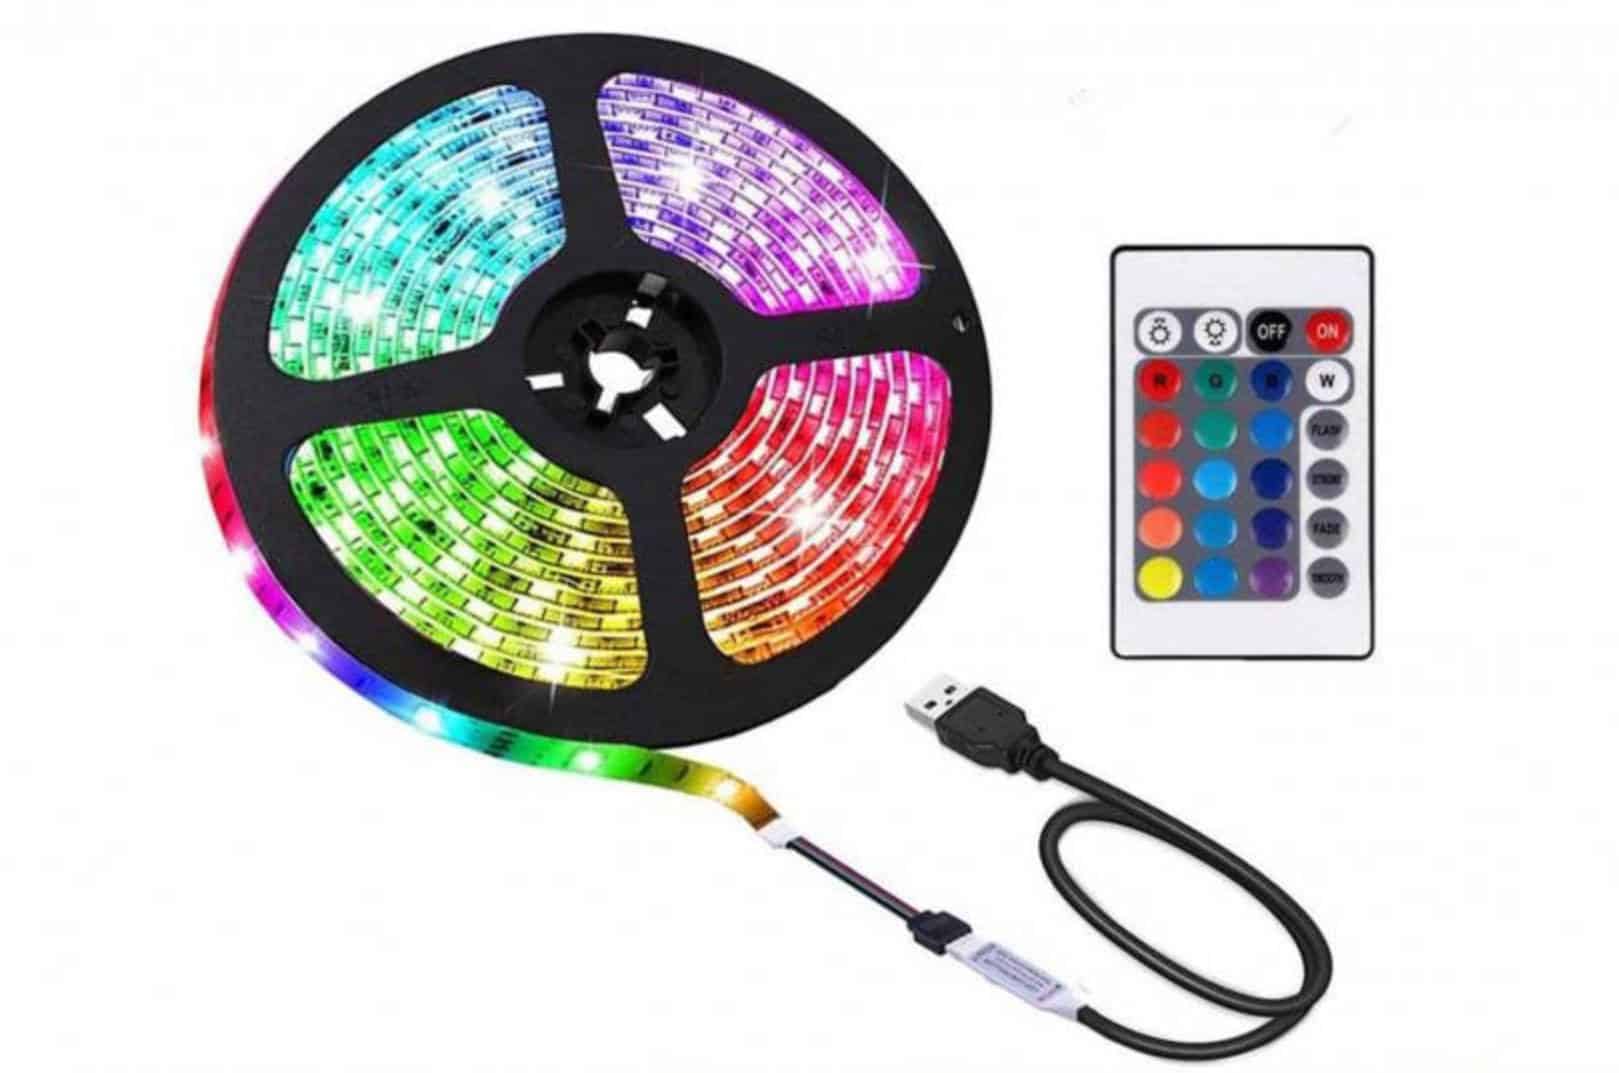 how to fix led lights when the colors are wrong